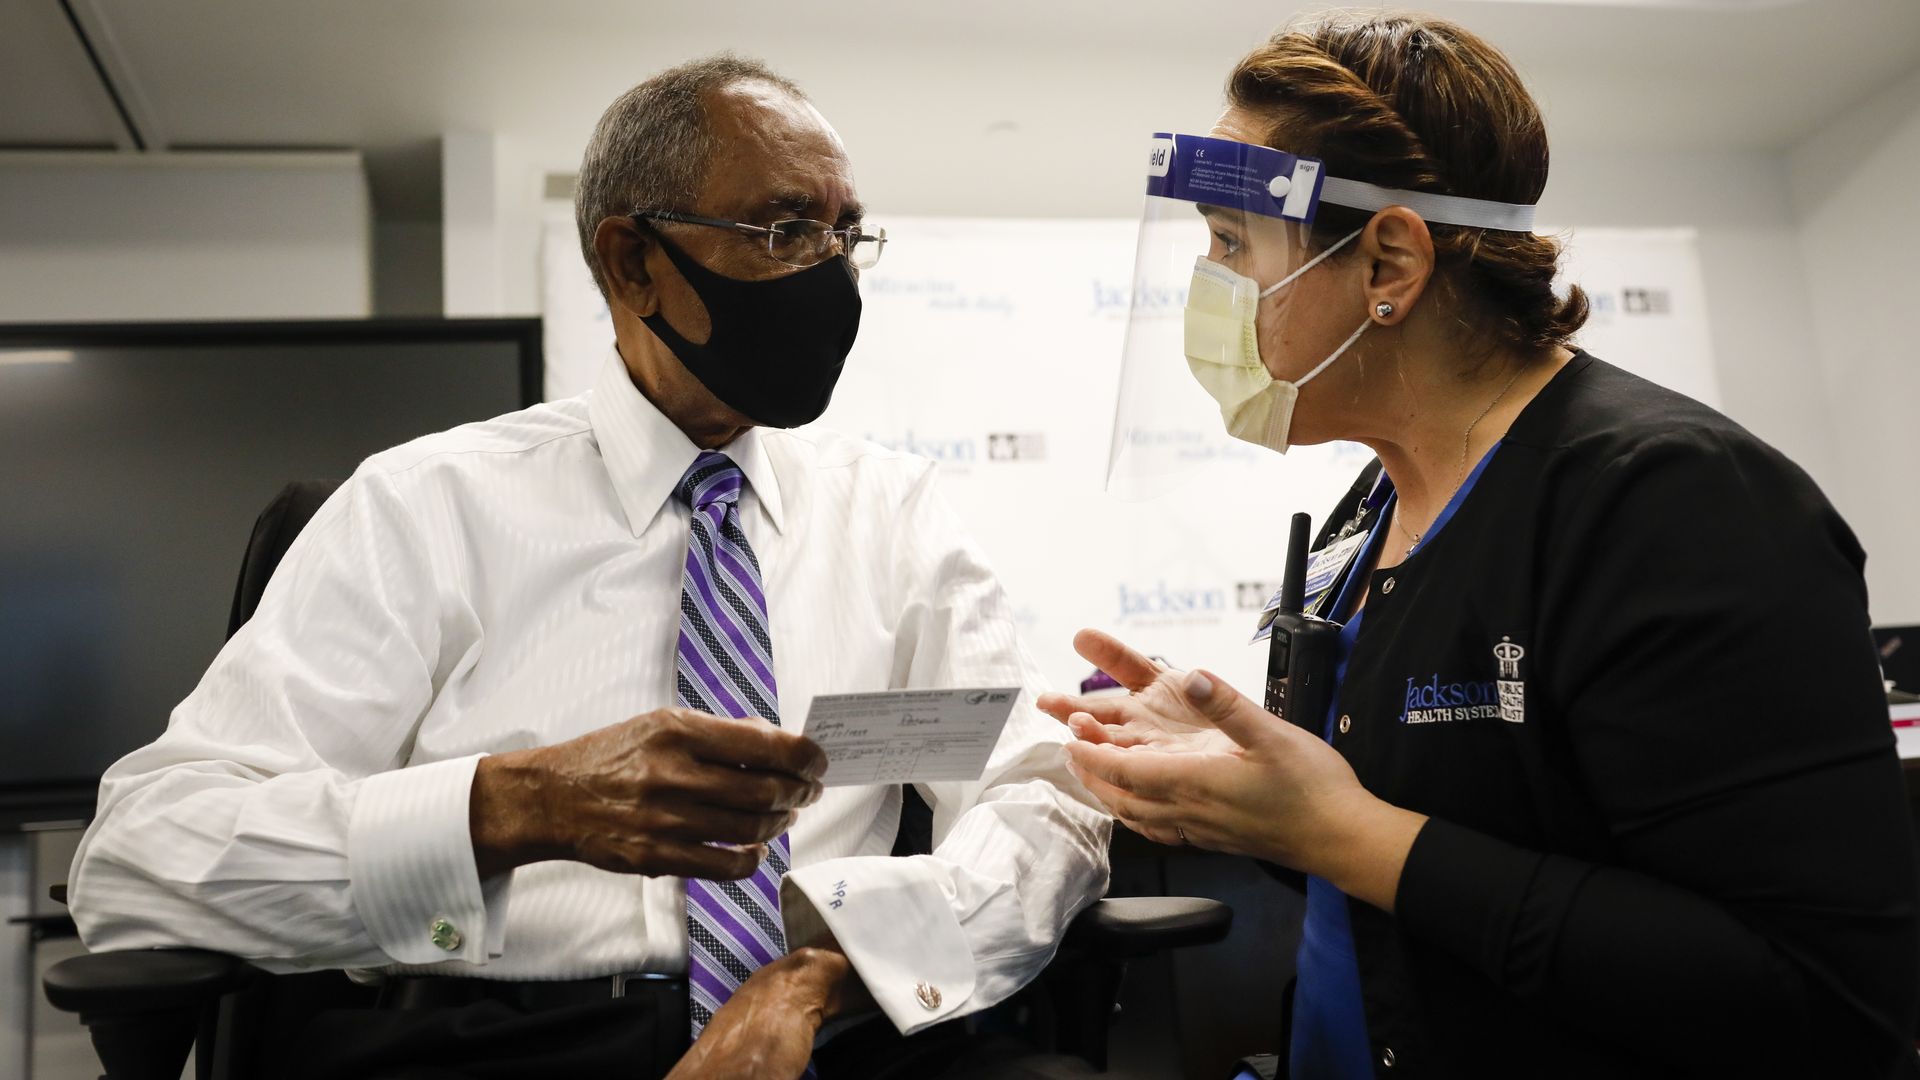 A woman wearing a face shield, face mask and PPE hands a card to a man in a suit and face mask 